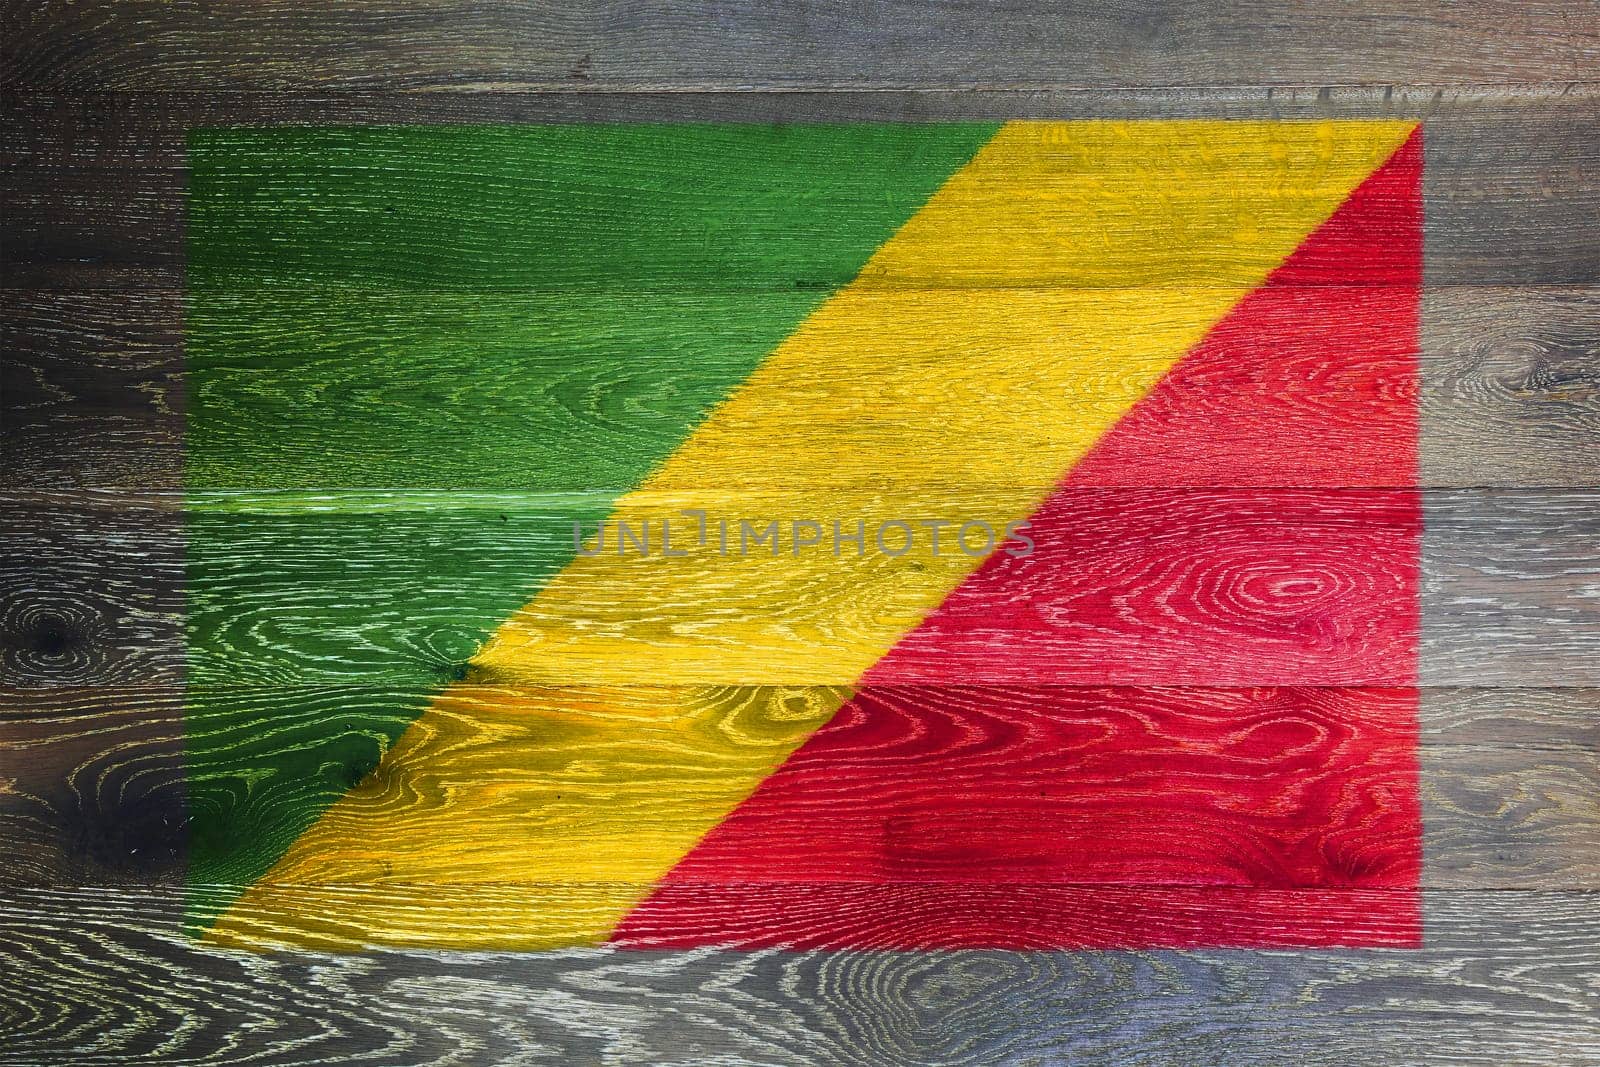 Congo flag on rustic old wood surface background by VivacityImages